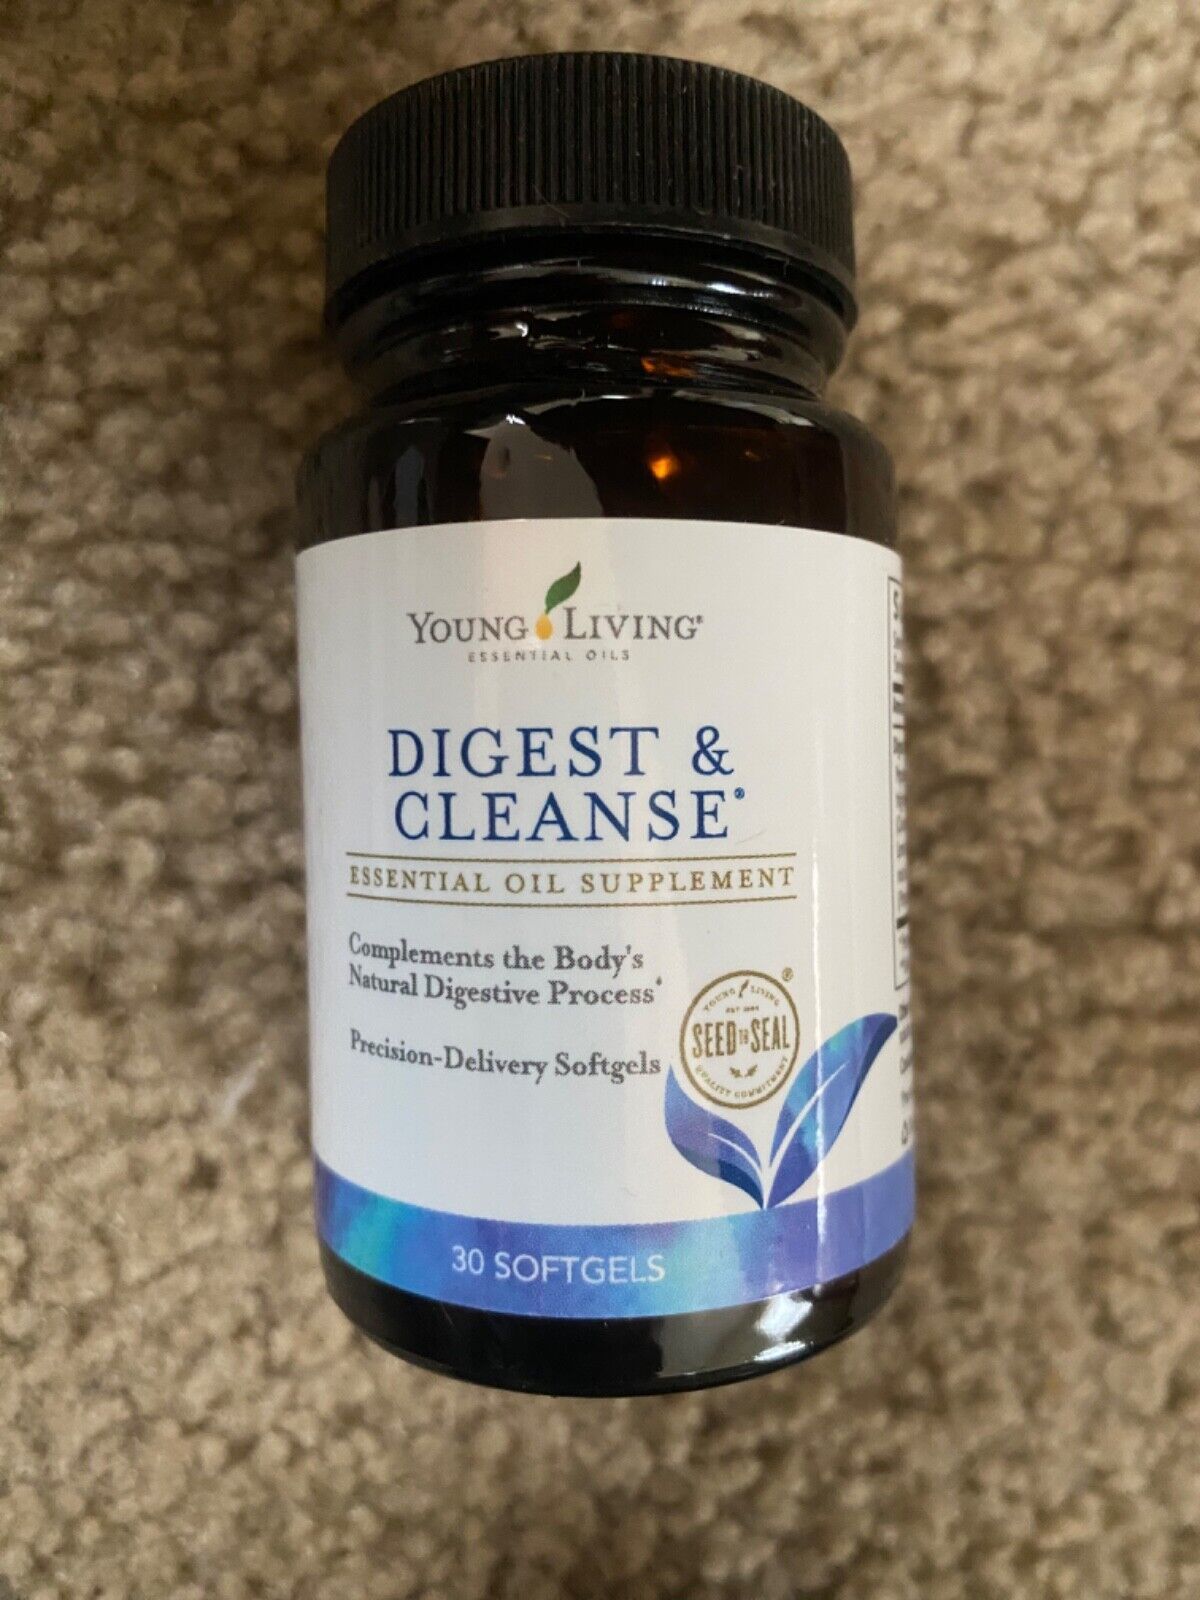 Young Living Herbal Infused Supplement Digest & Cleanse Your Gut Will Thank You - $23.19